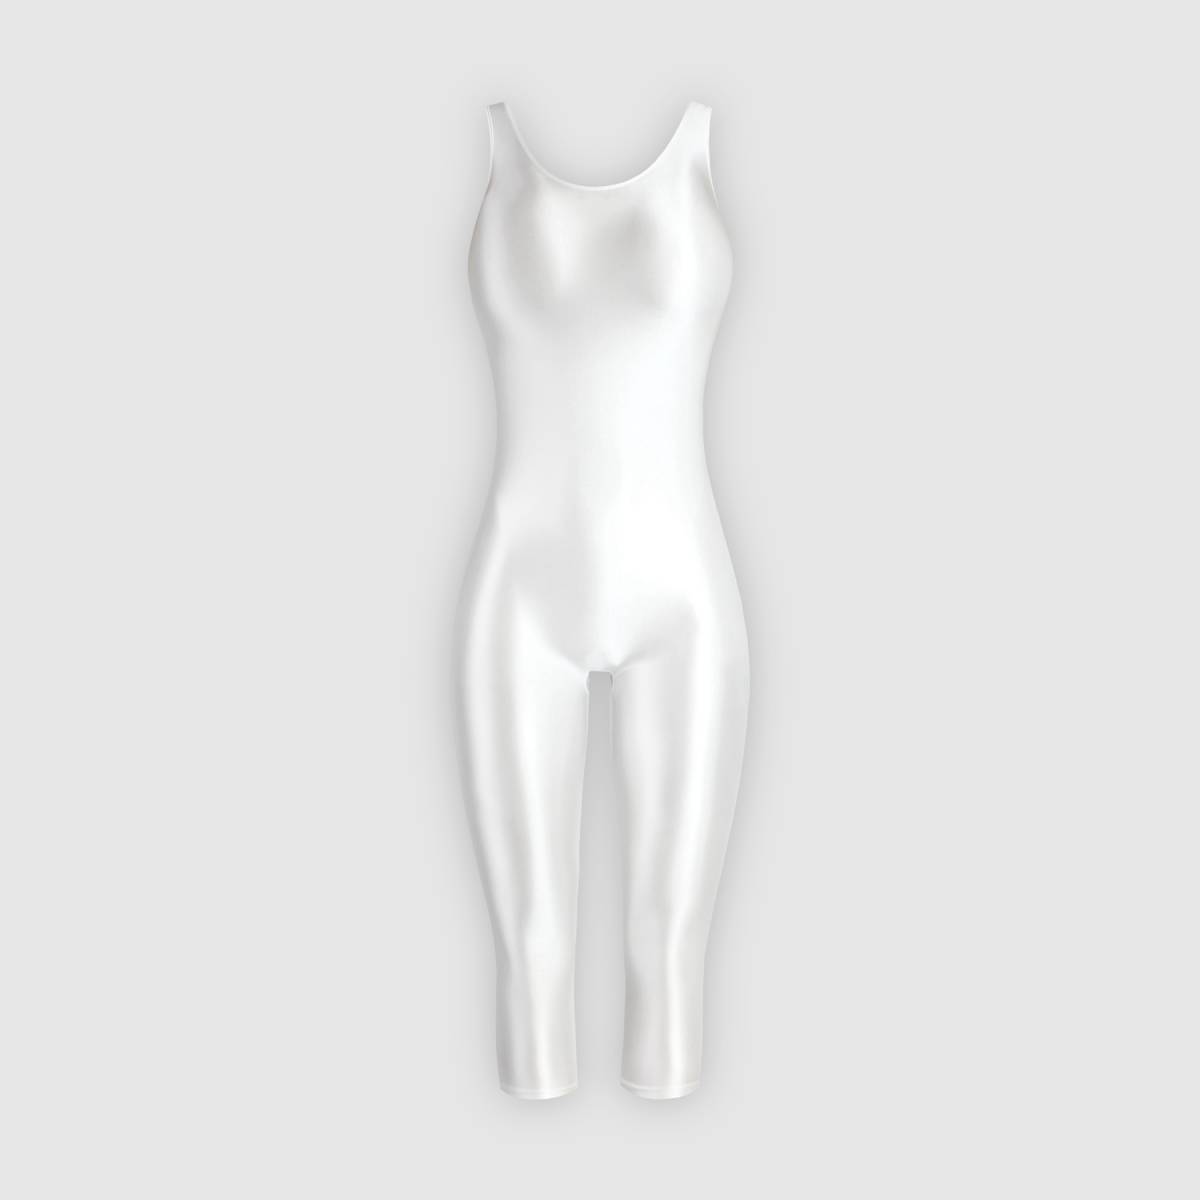 MJINM no sleeve car f pants (7 minute ) standard type zentai suit body suit yoga suit sexy costume play clothes white 